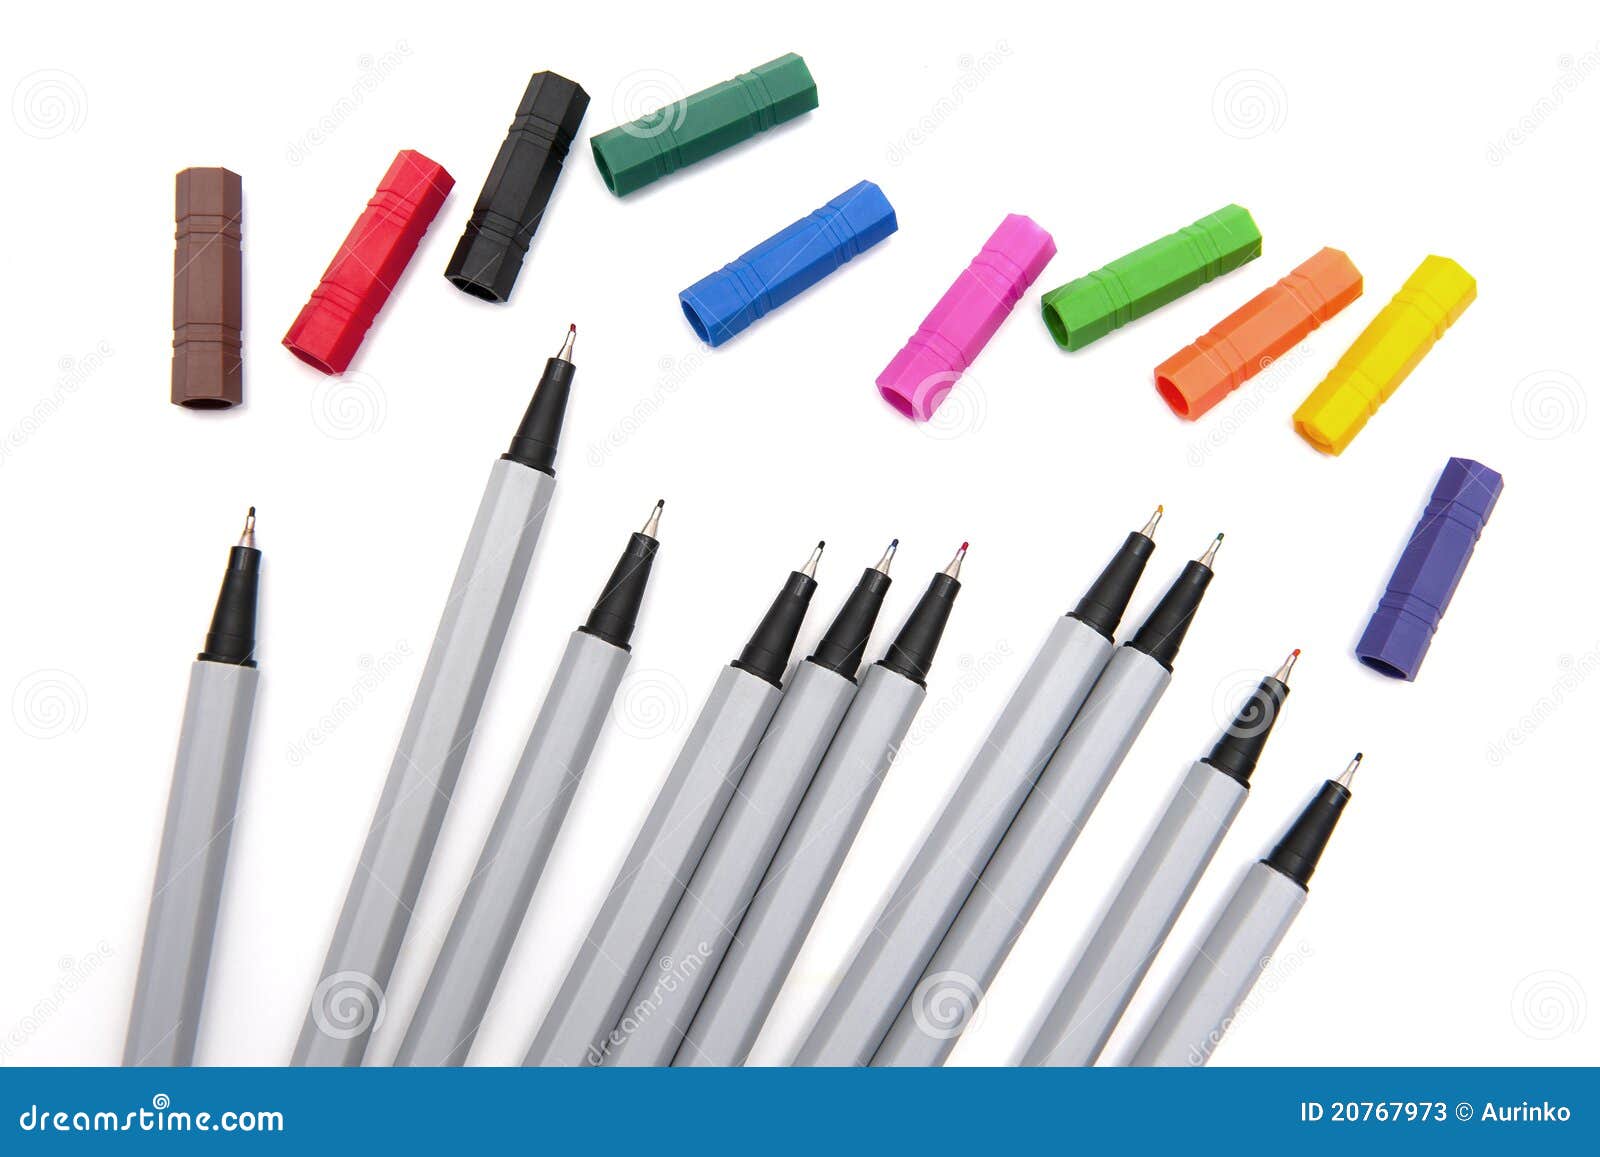 20+ Fine Liner Pen Stock Photos, Pictures & Royalty-Free Images